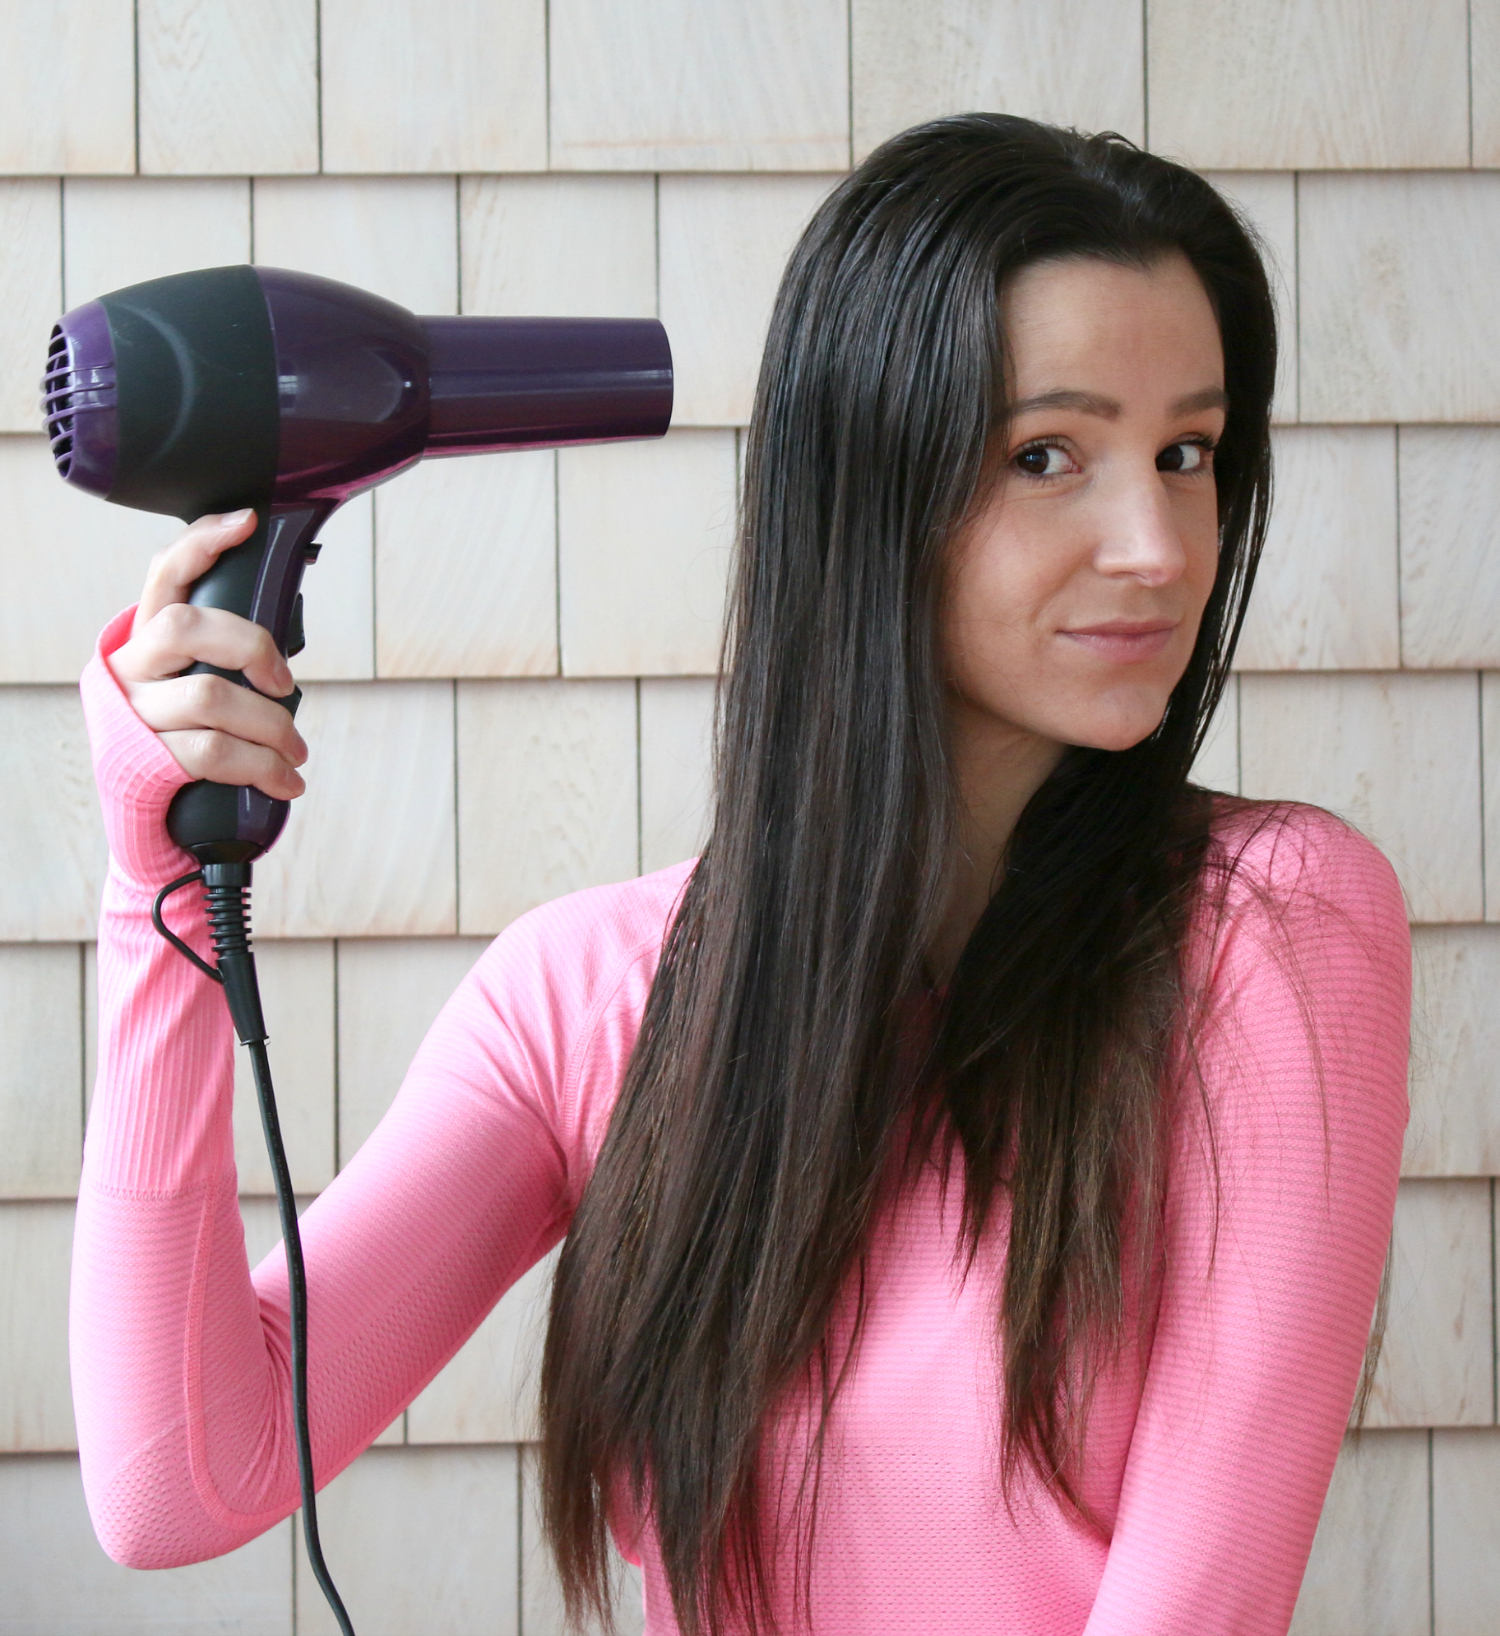 The long hair care routine for mitigating damage from styling with heat